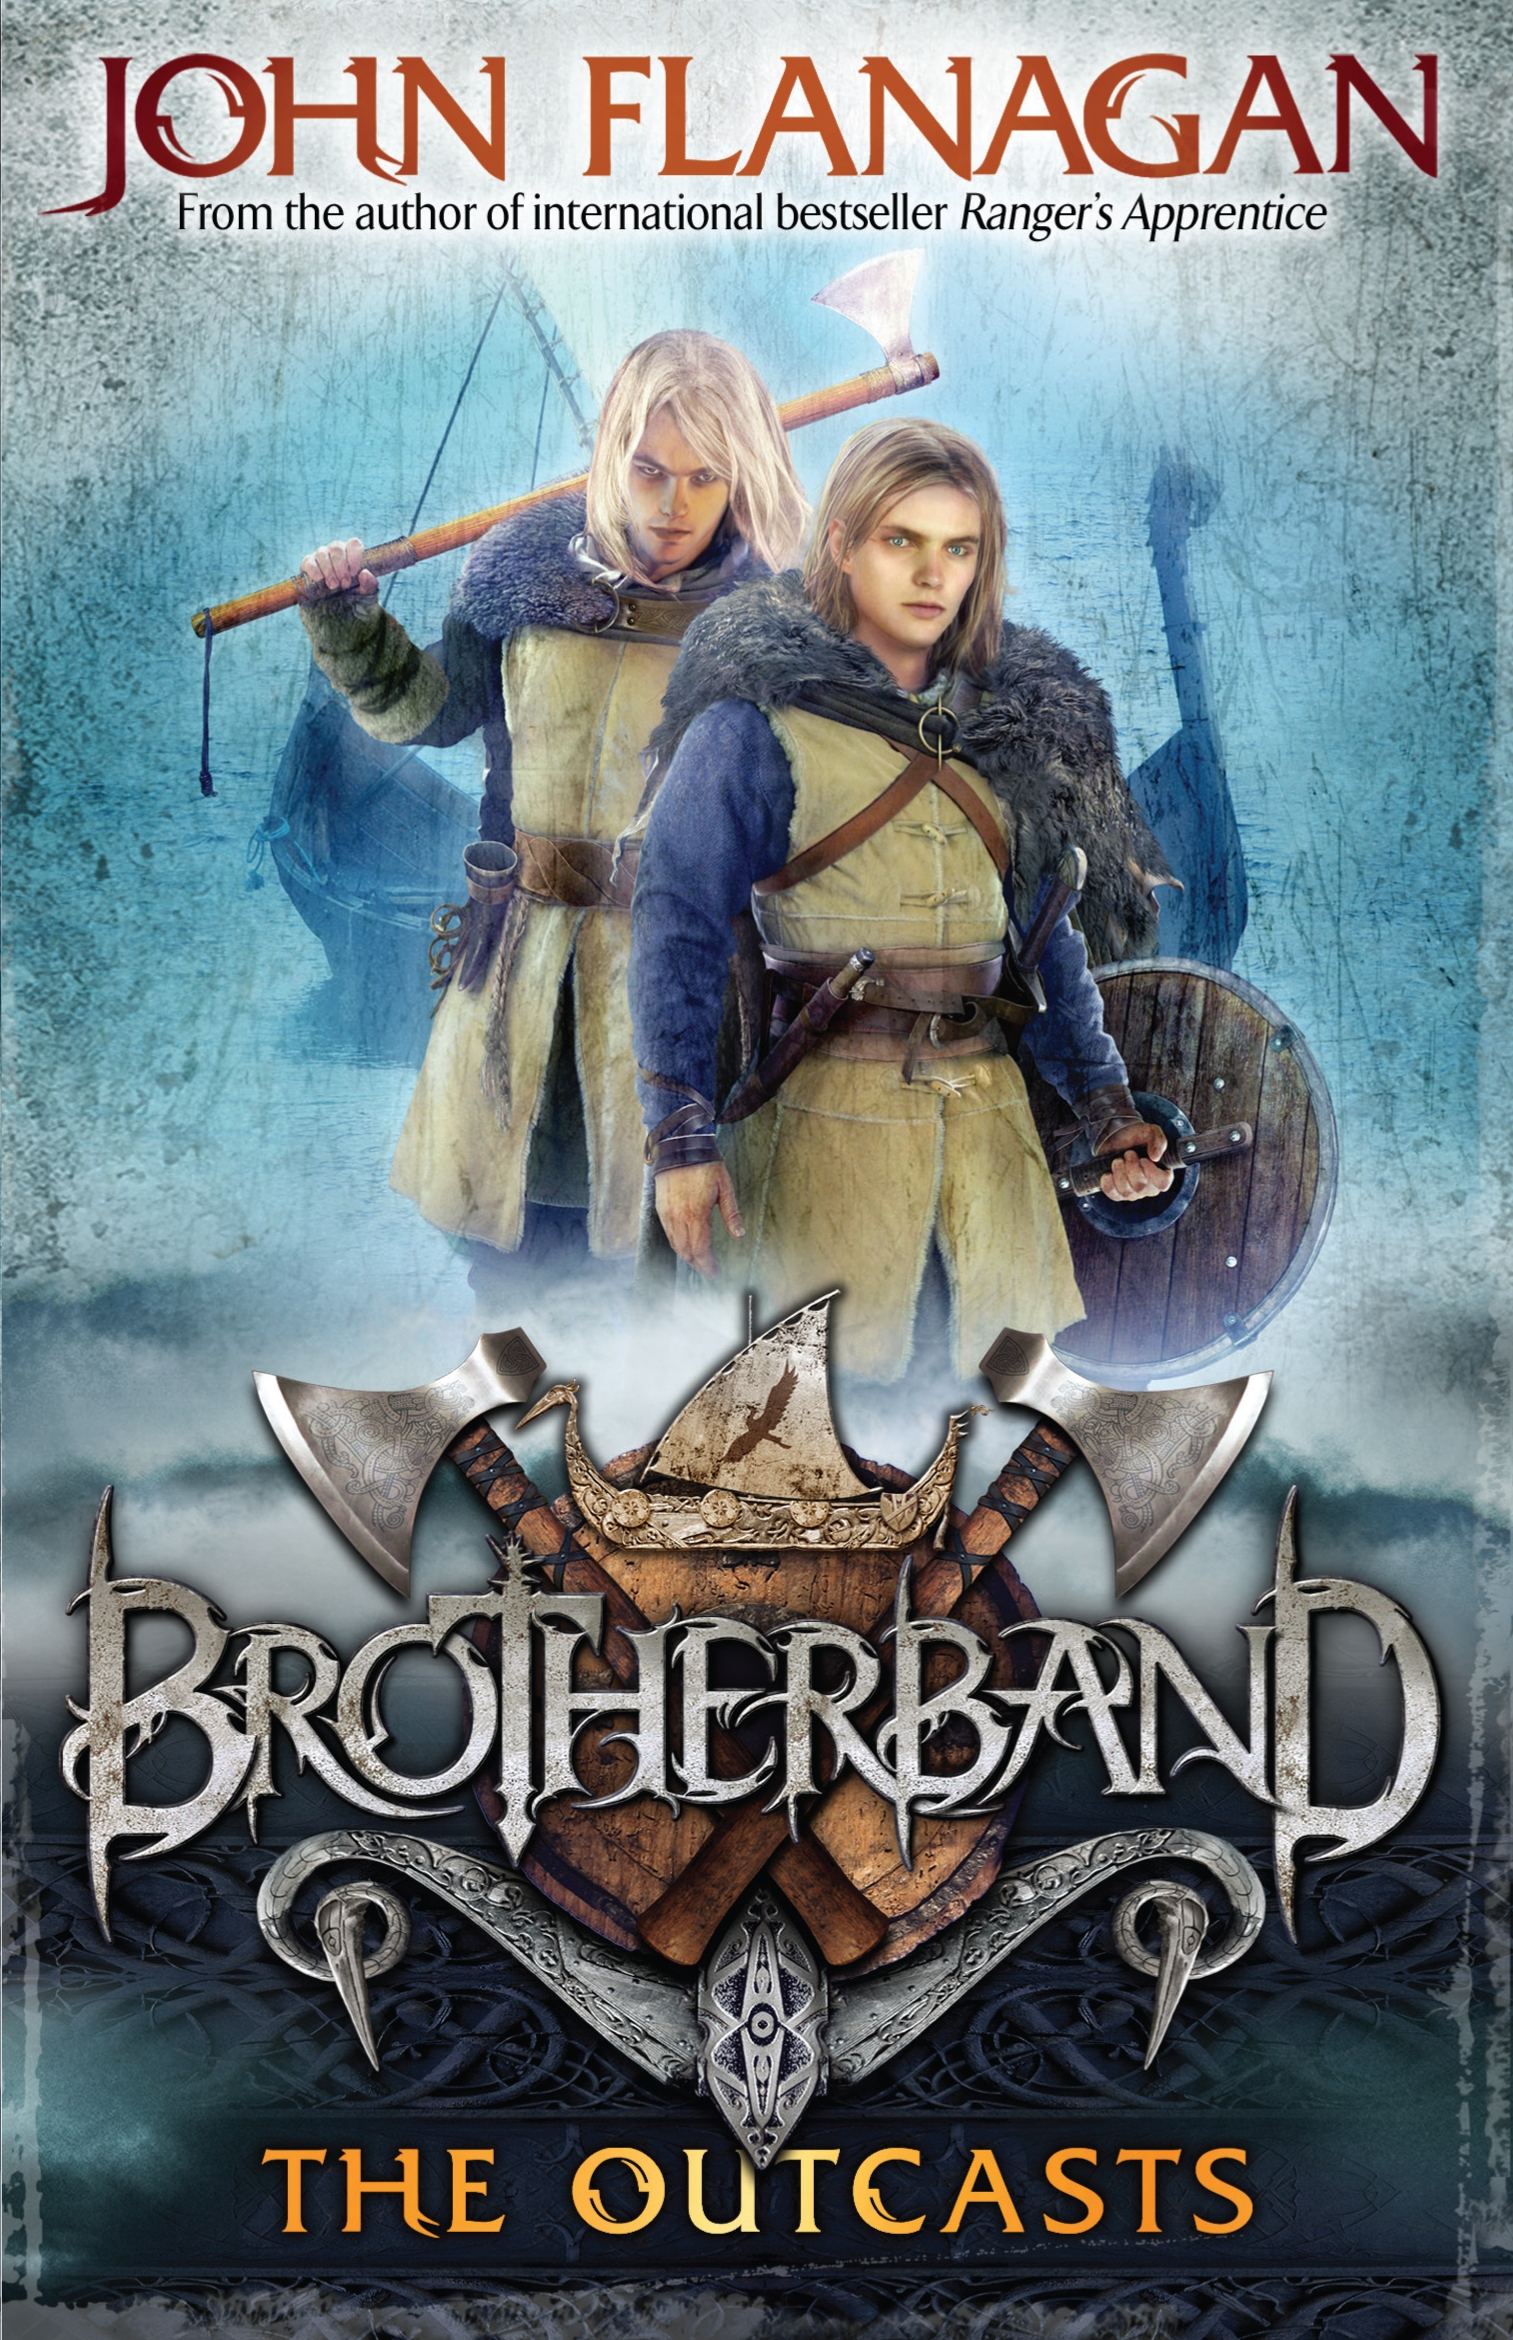 Read Brotherband Chronicles online, free